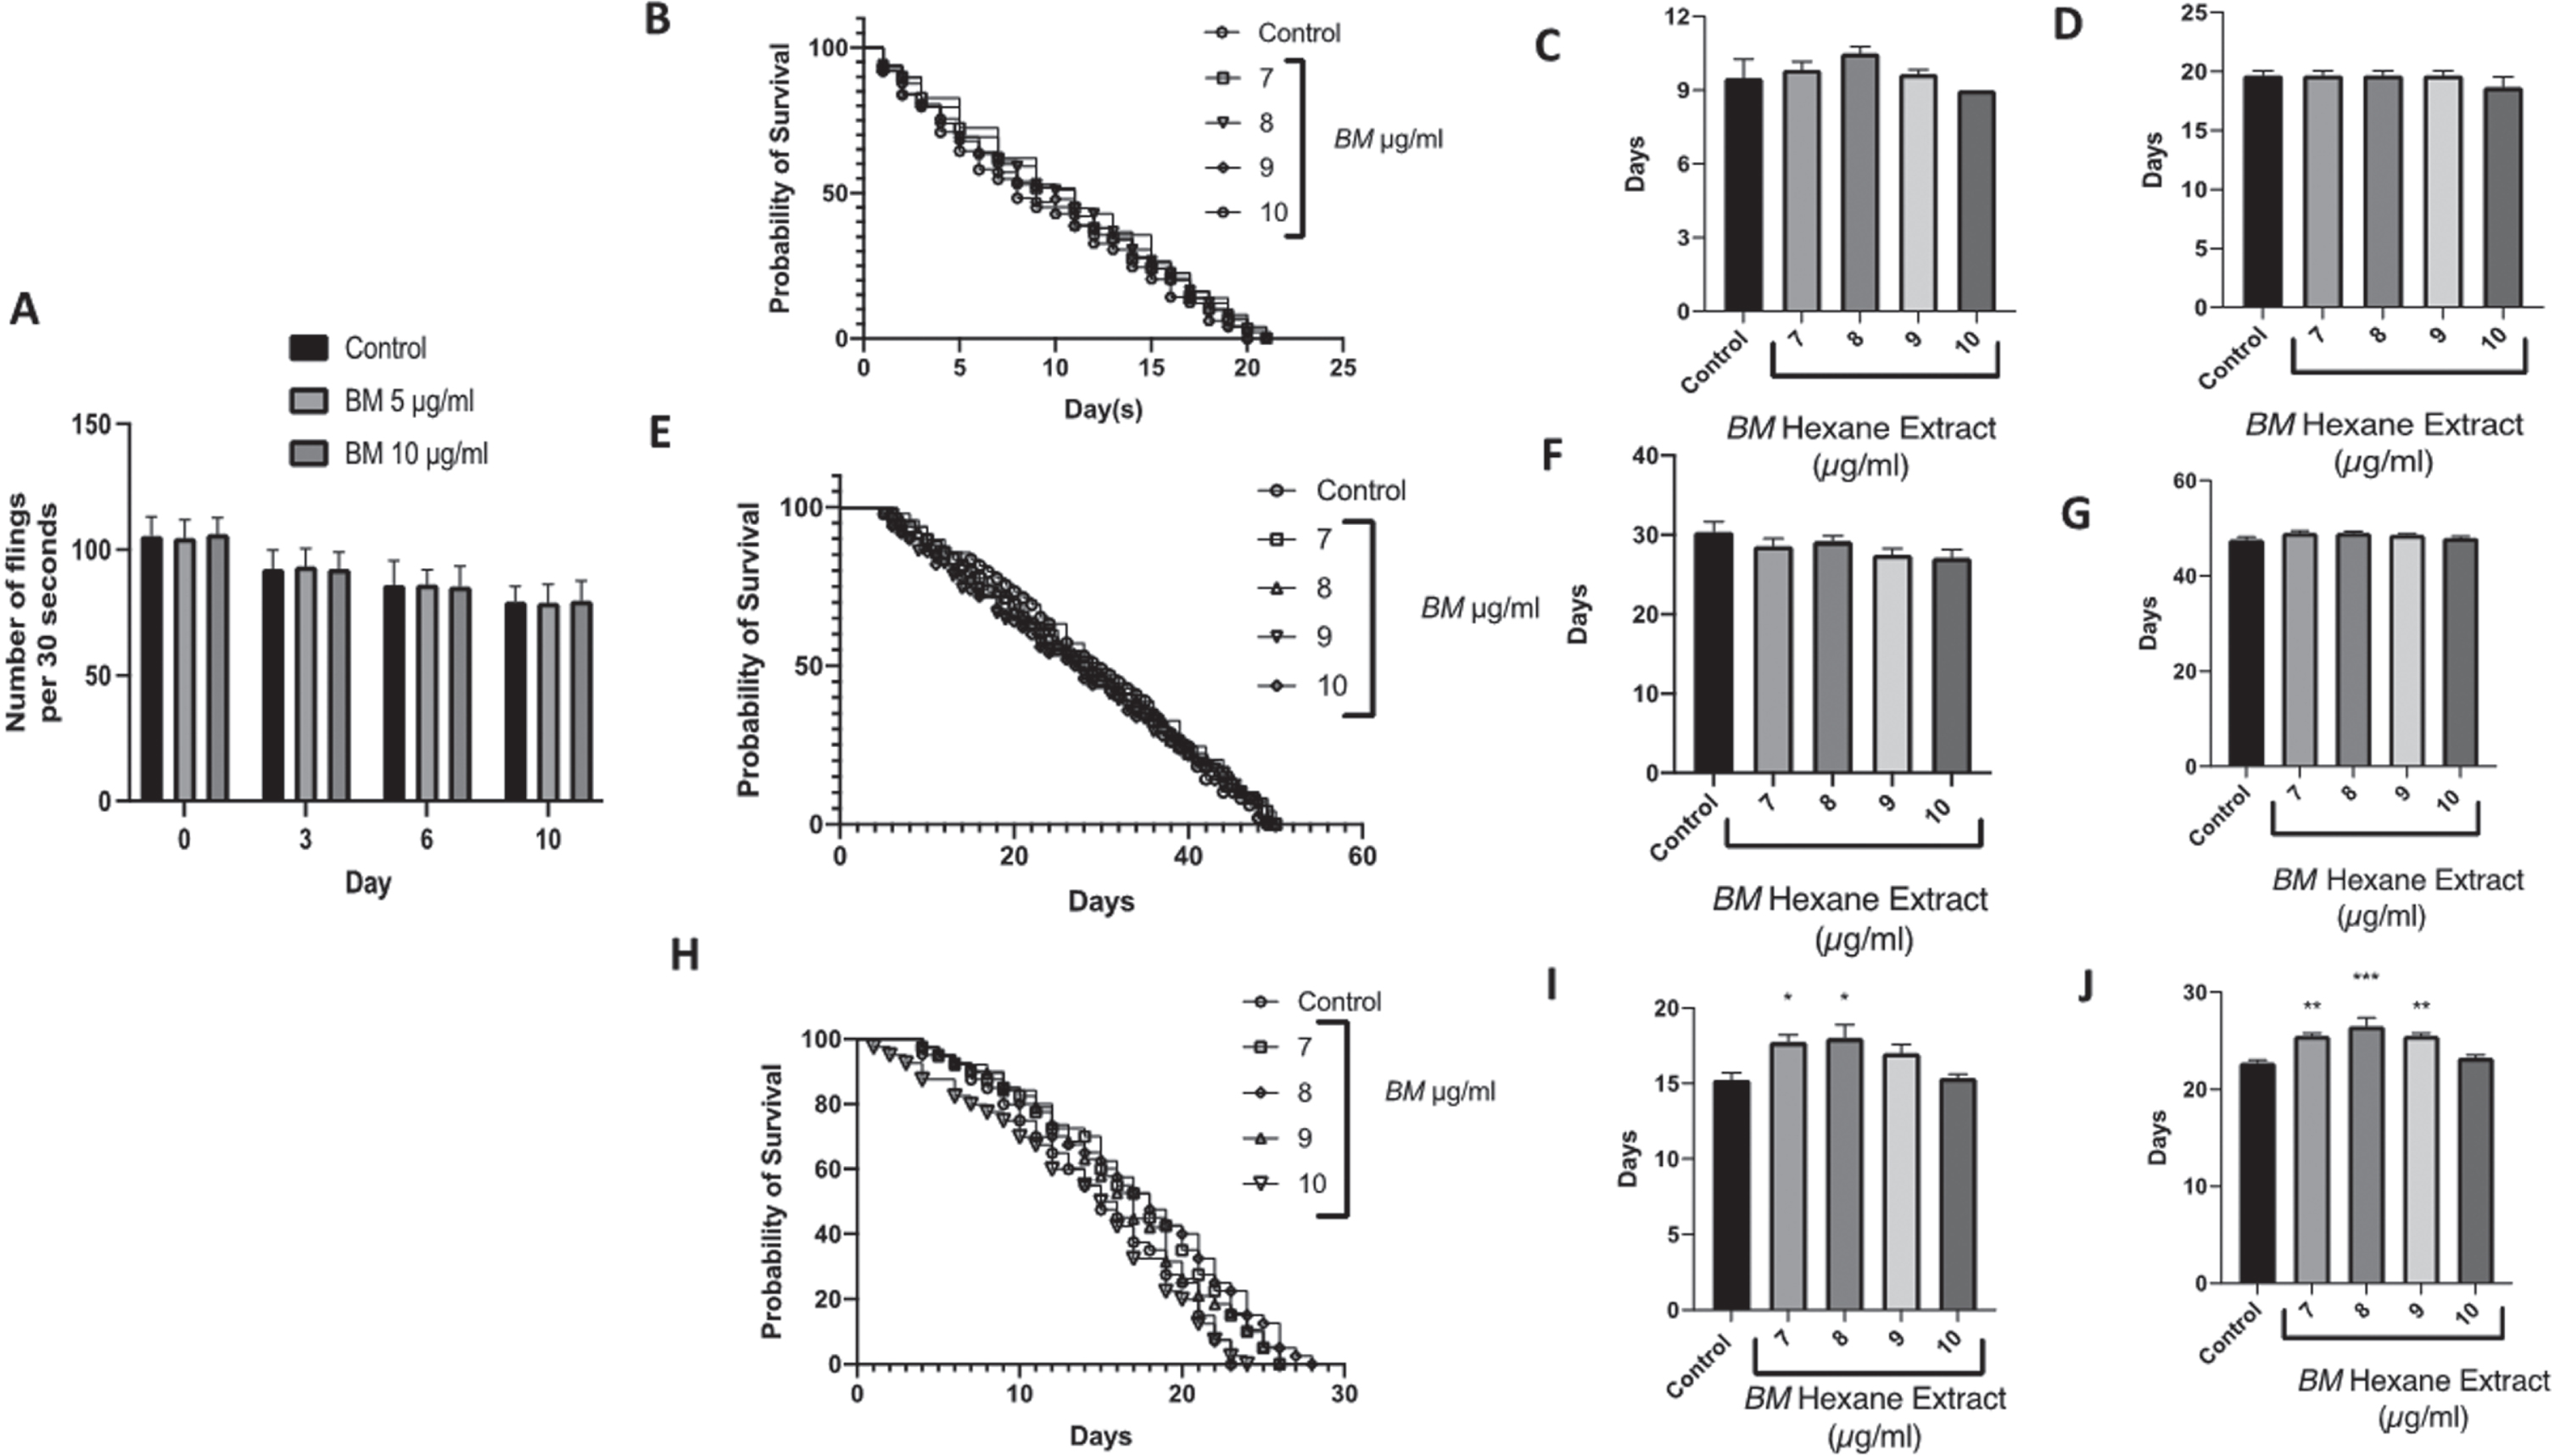 The effect of the hexane extract of Bacopa monnieri on the lifespan of C. elegans mutants: A Pharyngeal pumping assay showing no difference in number of flings at 5 and 10μg/ml compared to control over 10 days of treatment. B Survival curve of daf-16 mutants treated with Bacopa monnieri (7–10μg/ml). C Median lifespan of daf-16 mutant worms treated with Bacopa monnieri (7–10μg/ml). (mean±SEM, n = 5) D Maximum lifespan of daf-16 mutant worms treated with Bacopa monnieri (7–10μg/ml). (mean±SEM, n = 5) E Survival curve of daf-2 mutants treated with Bacopa monnieri (7–10μg/ml). F Median lifespan of daf-2 mutant worms treated with Bacopa monnieri (7–10μg/ml). (mean±SEM, n = 5) G Maximum lifespan of daf-2 mutant worms treated with Bacopa monnieri (7–10μg/ml). (mean±SEM, n = 5) H Survival curve of Aβ expressing transgenic strains treated with Bacopa monnieri (7–10μg/ml). I Median lifespan of Aβ expressing transgenic strains treated with Bacopa monnieri (7–10μg/ml). (mean±SEM, n = 5) J Maximum lifespan of Aβ expressing transgenic strains treated with Bacopa monnieri (7–10μg/ml). (mean±SEM, n = 5). Significant changes from control (ANOVA followed by Dunnett’s post hoc multiple comparison test) *p < 0.05 **p < 0.01.